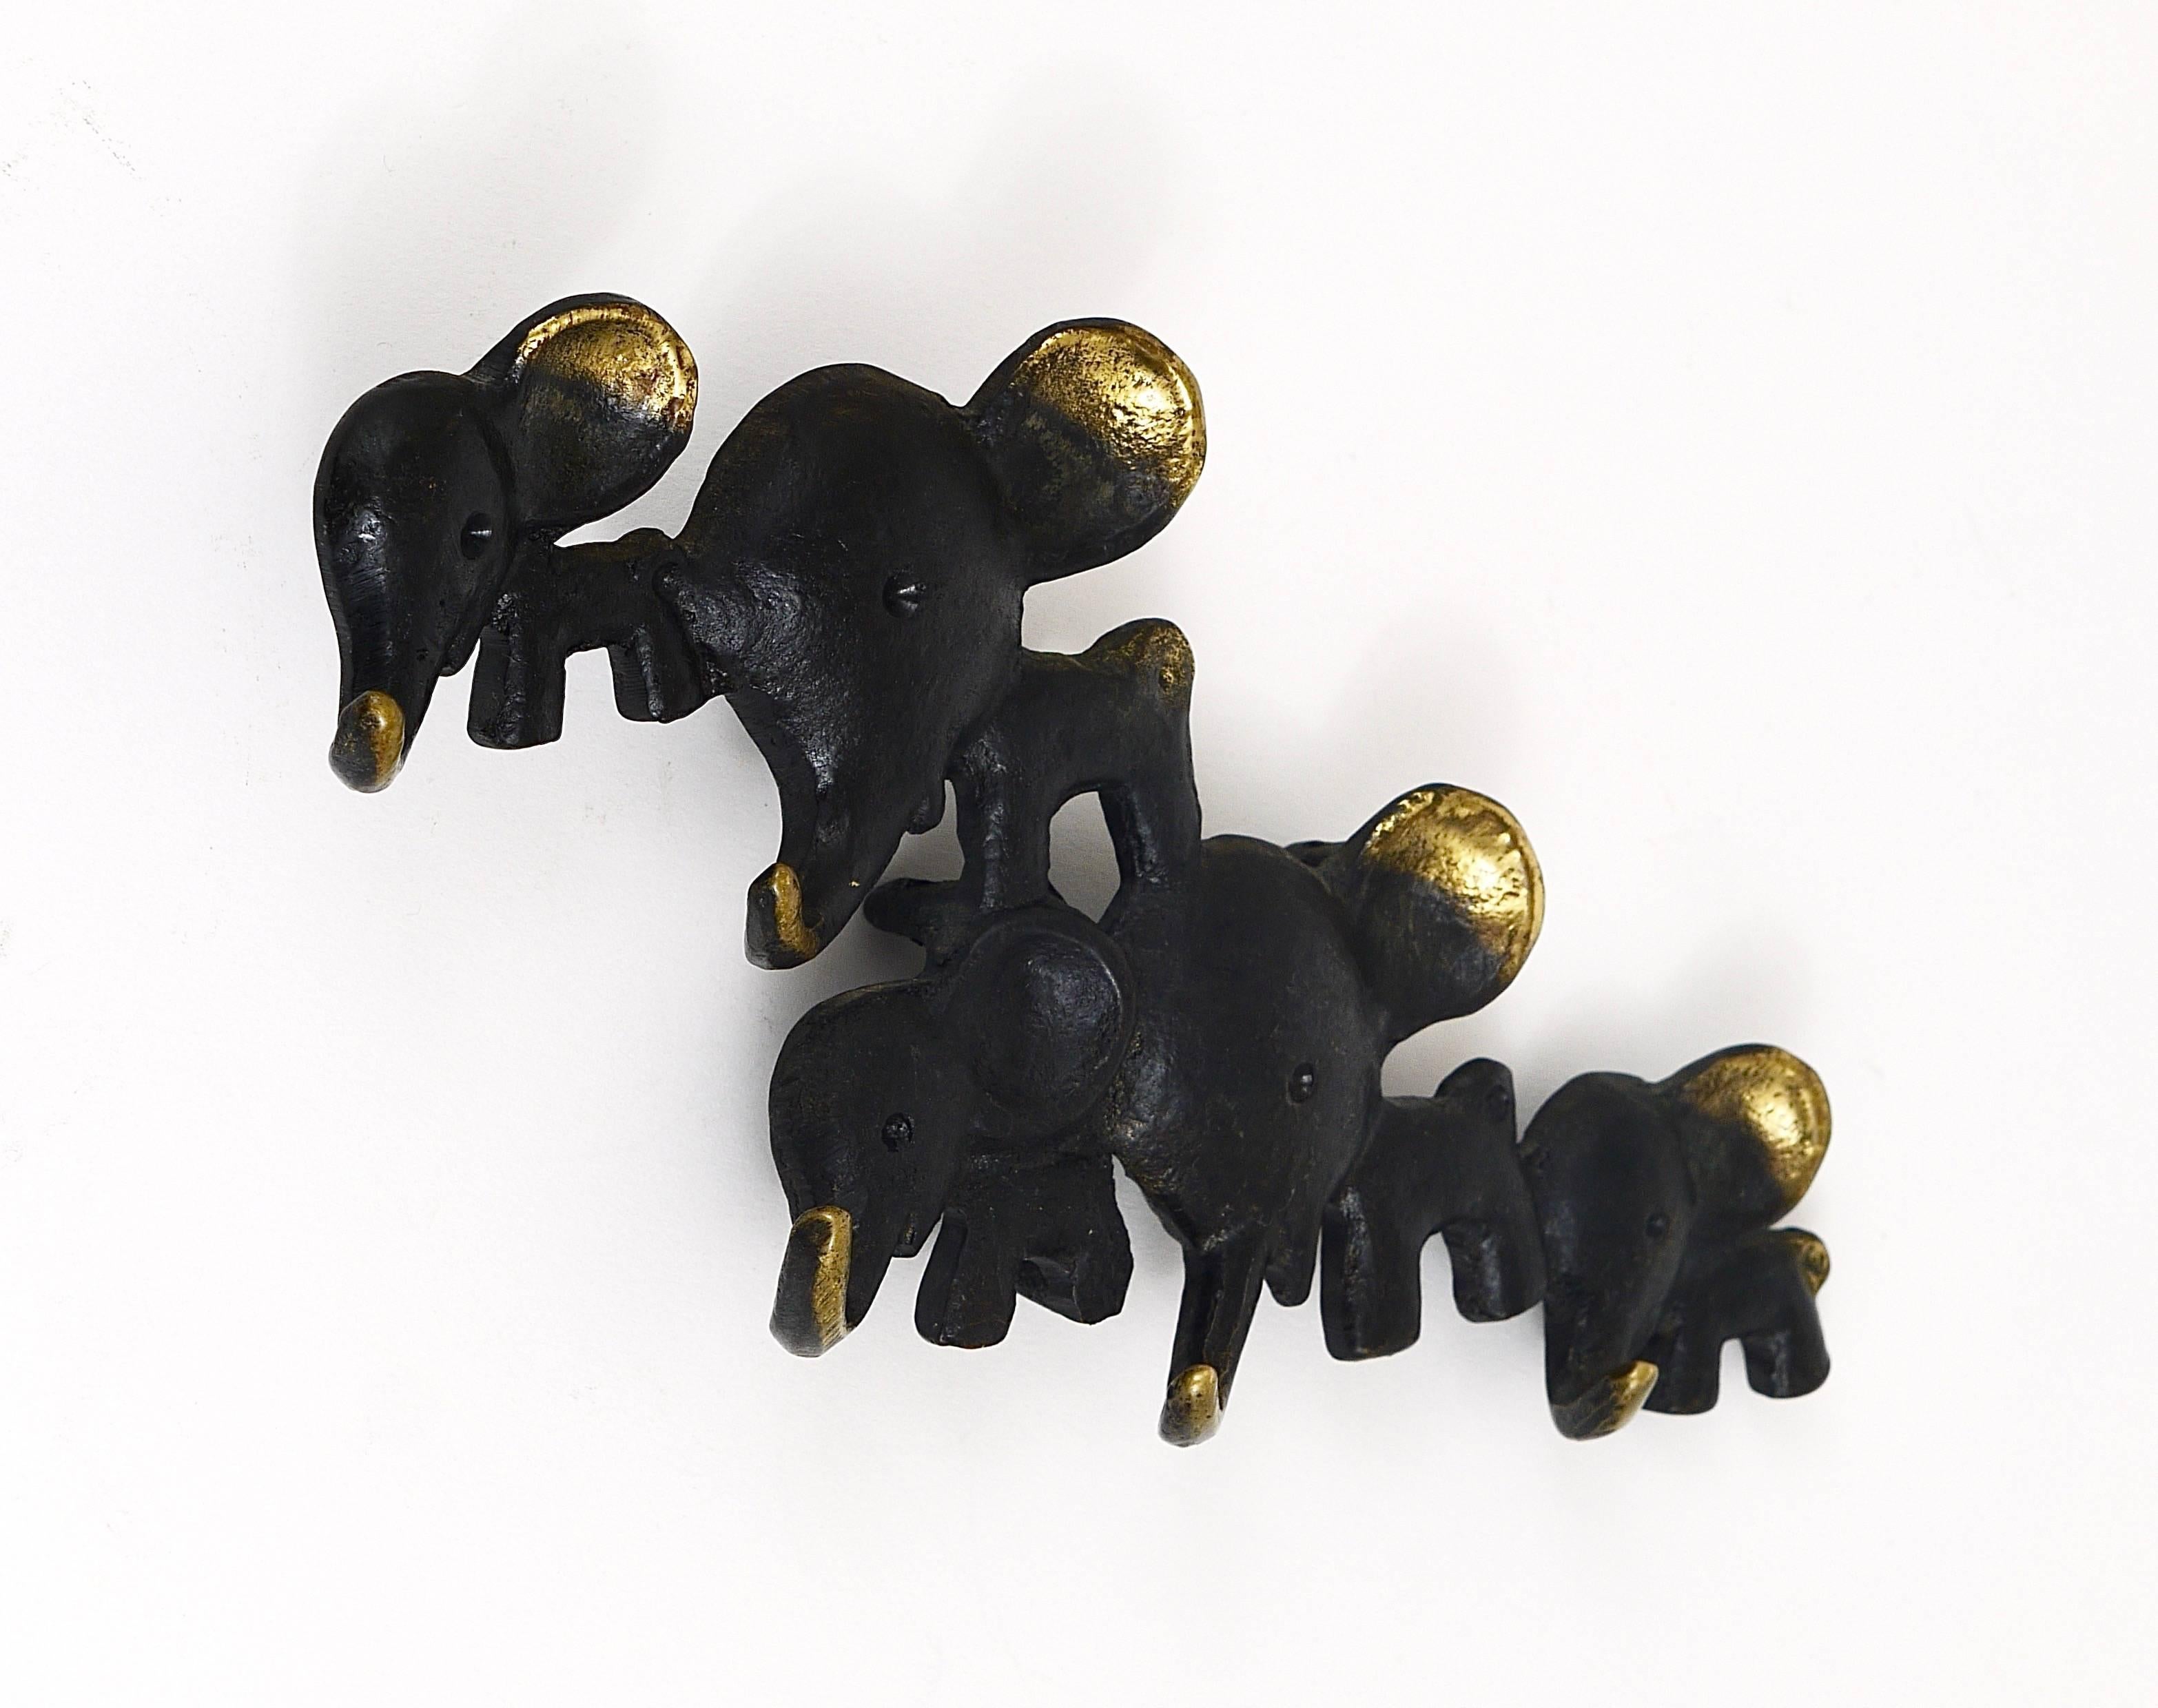 A charming and rare key holder, displaying five elephants in different sizes. A very humorous design by Walter Bosse, executed by Hertha Baller, Austria, in the 1950s. Also suitable as a towel holder or for dish towels in the kitchen. Made of brass,